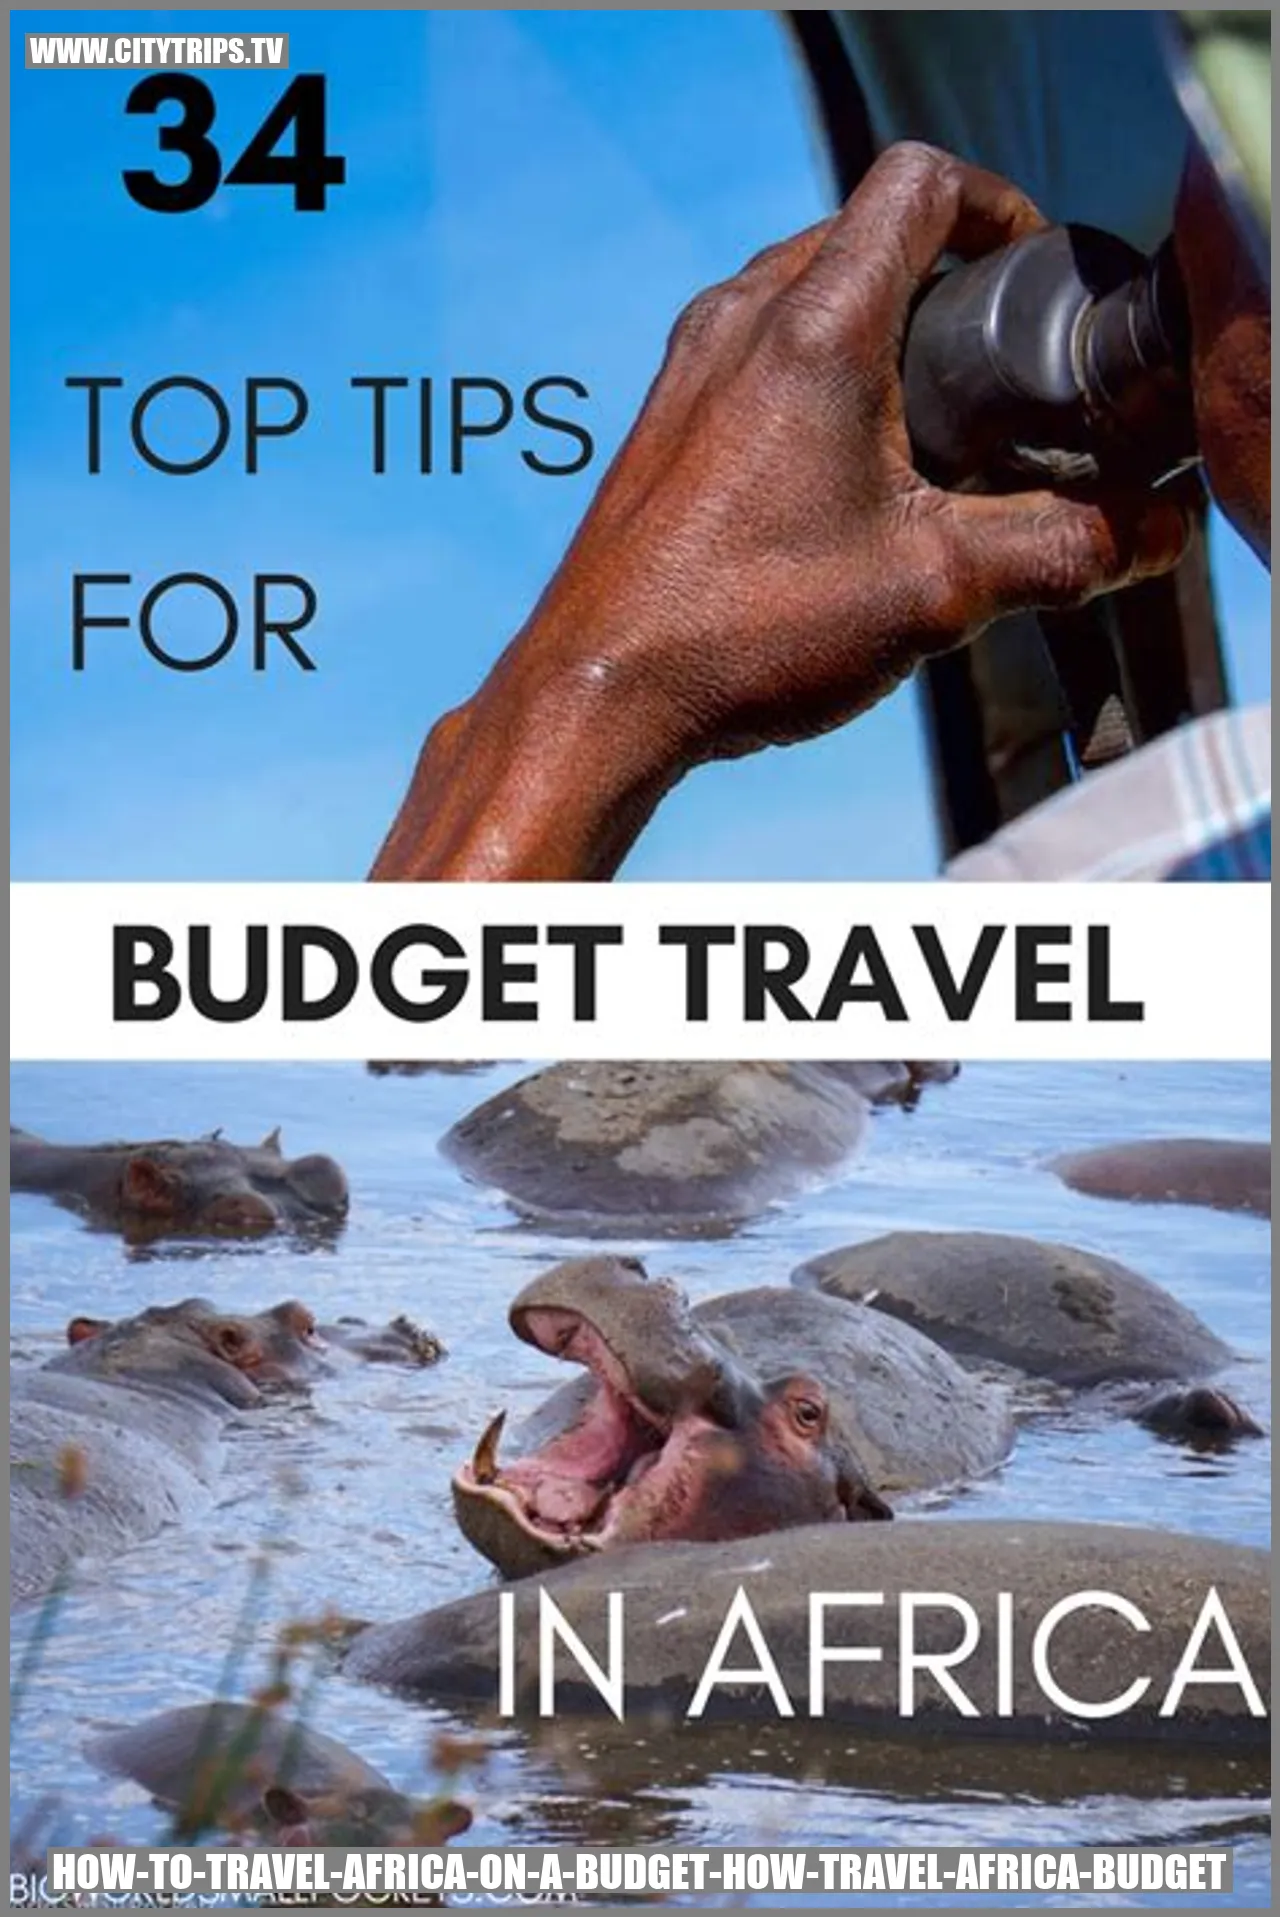 How to Travel to Africa on a Budget